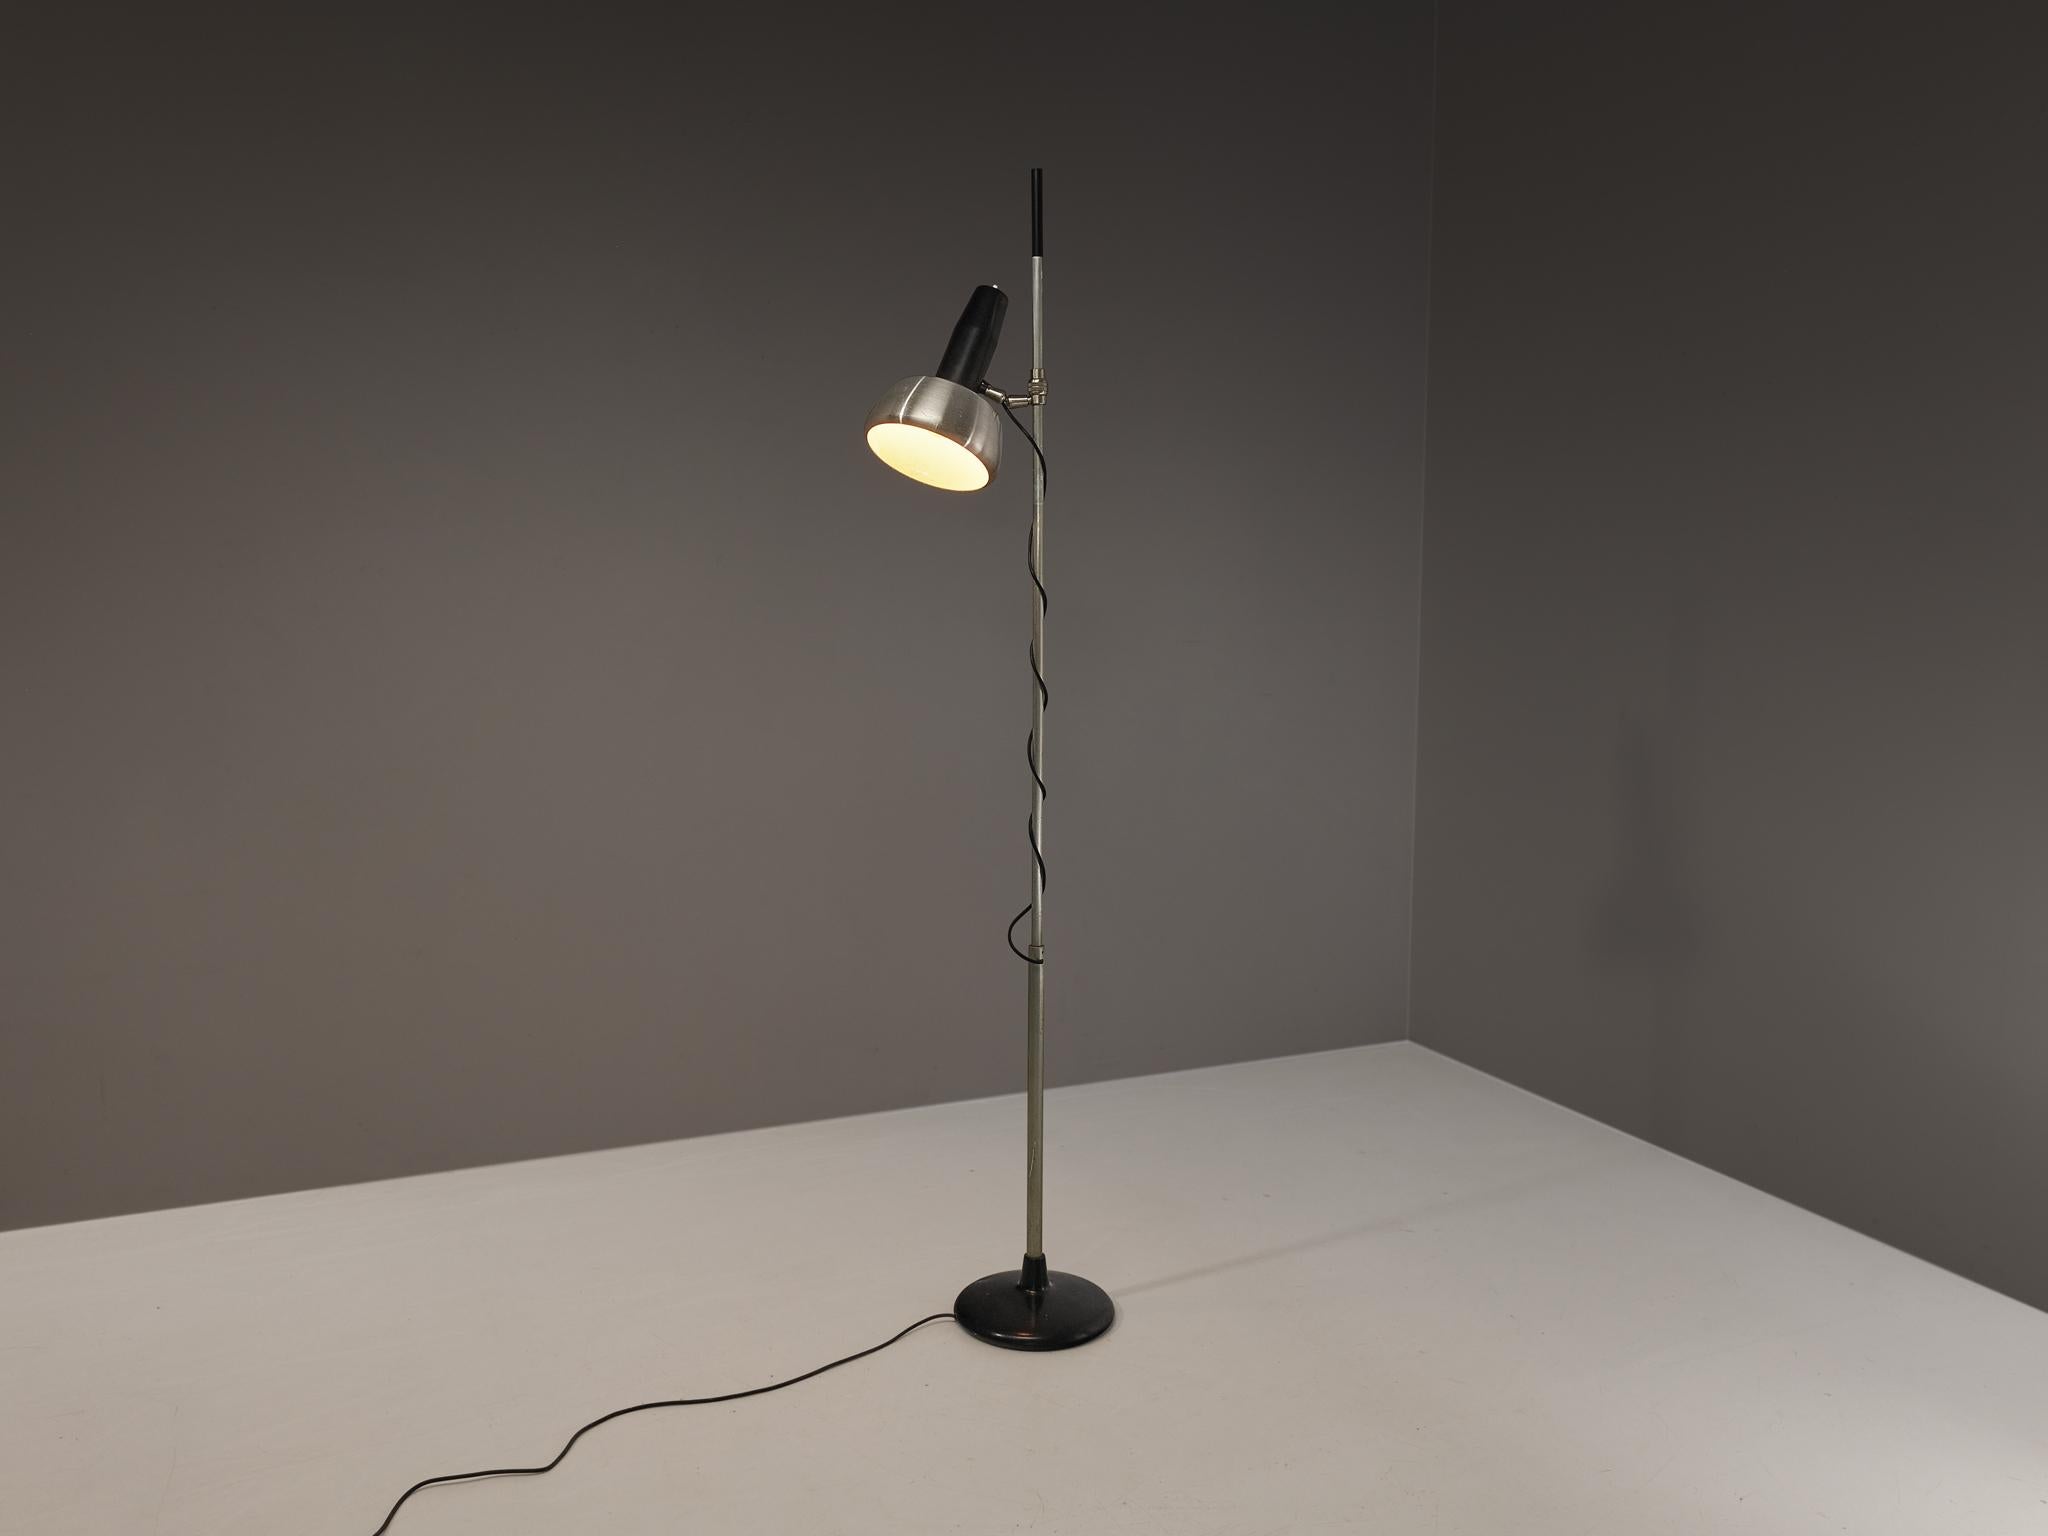 Oscar Torlasco for Lumi, floor lamp model '721', chrome, aluminum, Italy, 1950s

Lumi was one of the most innovative lighting design companies in Italy during the midcentury period. This floor lamp is characterized by its clear and simple aesthetic